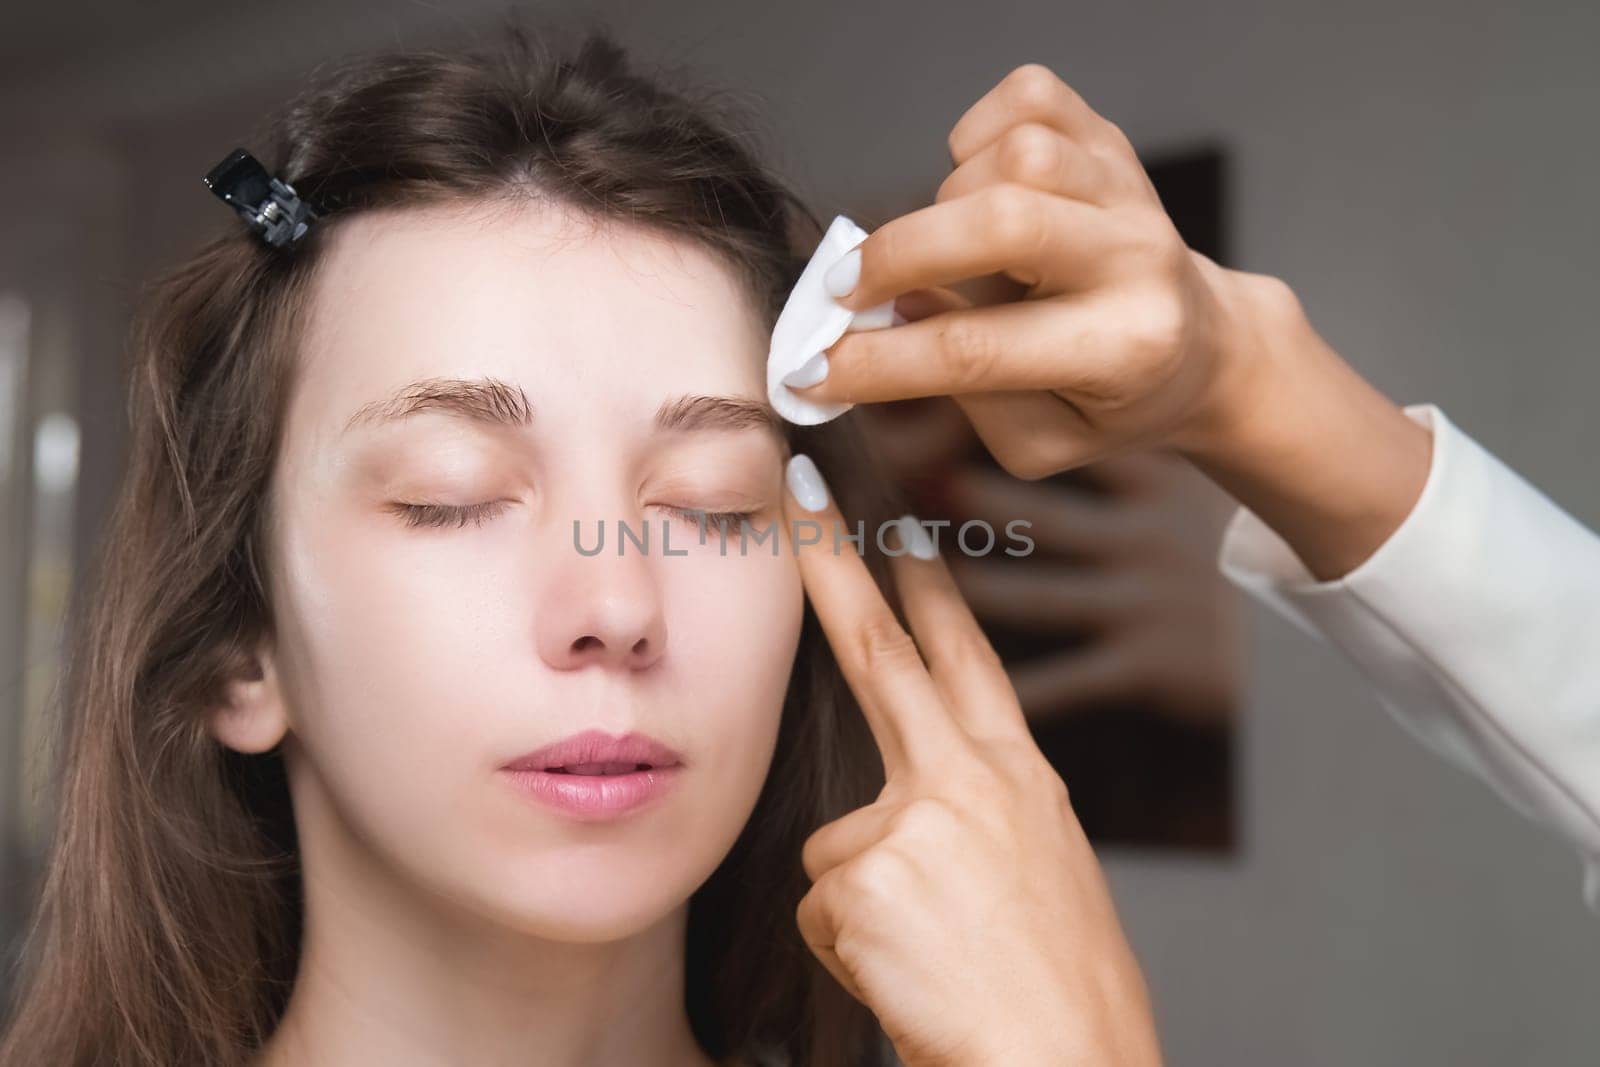 In a beauty salon, a master cosmetologist applies makeup and wipes eyebrows with a cotton pad. Close-up of the model's face during the procedure.